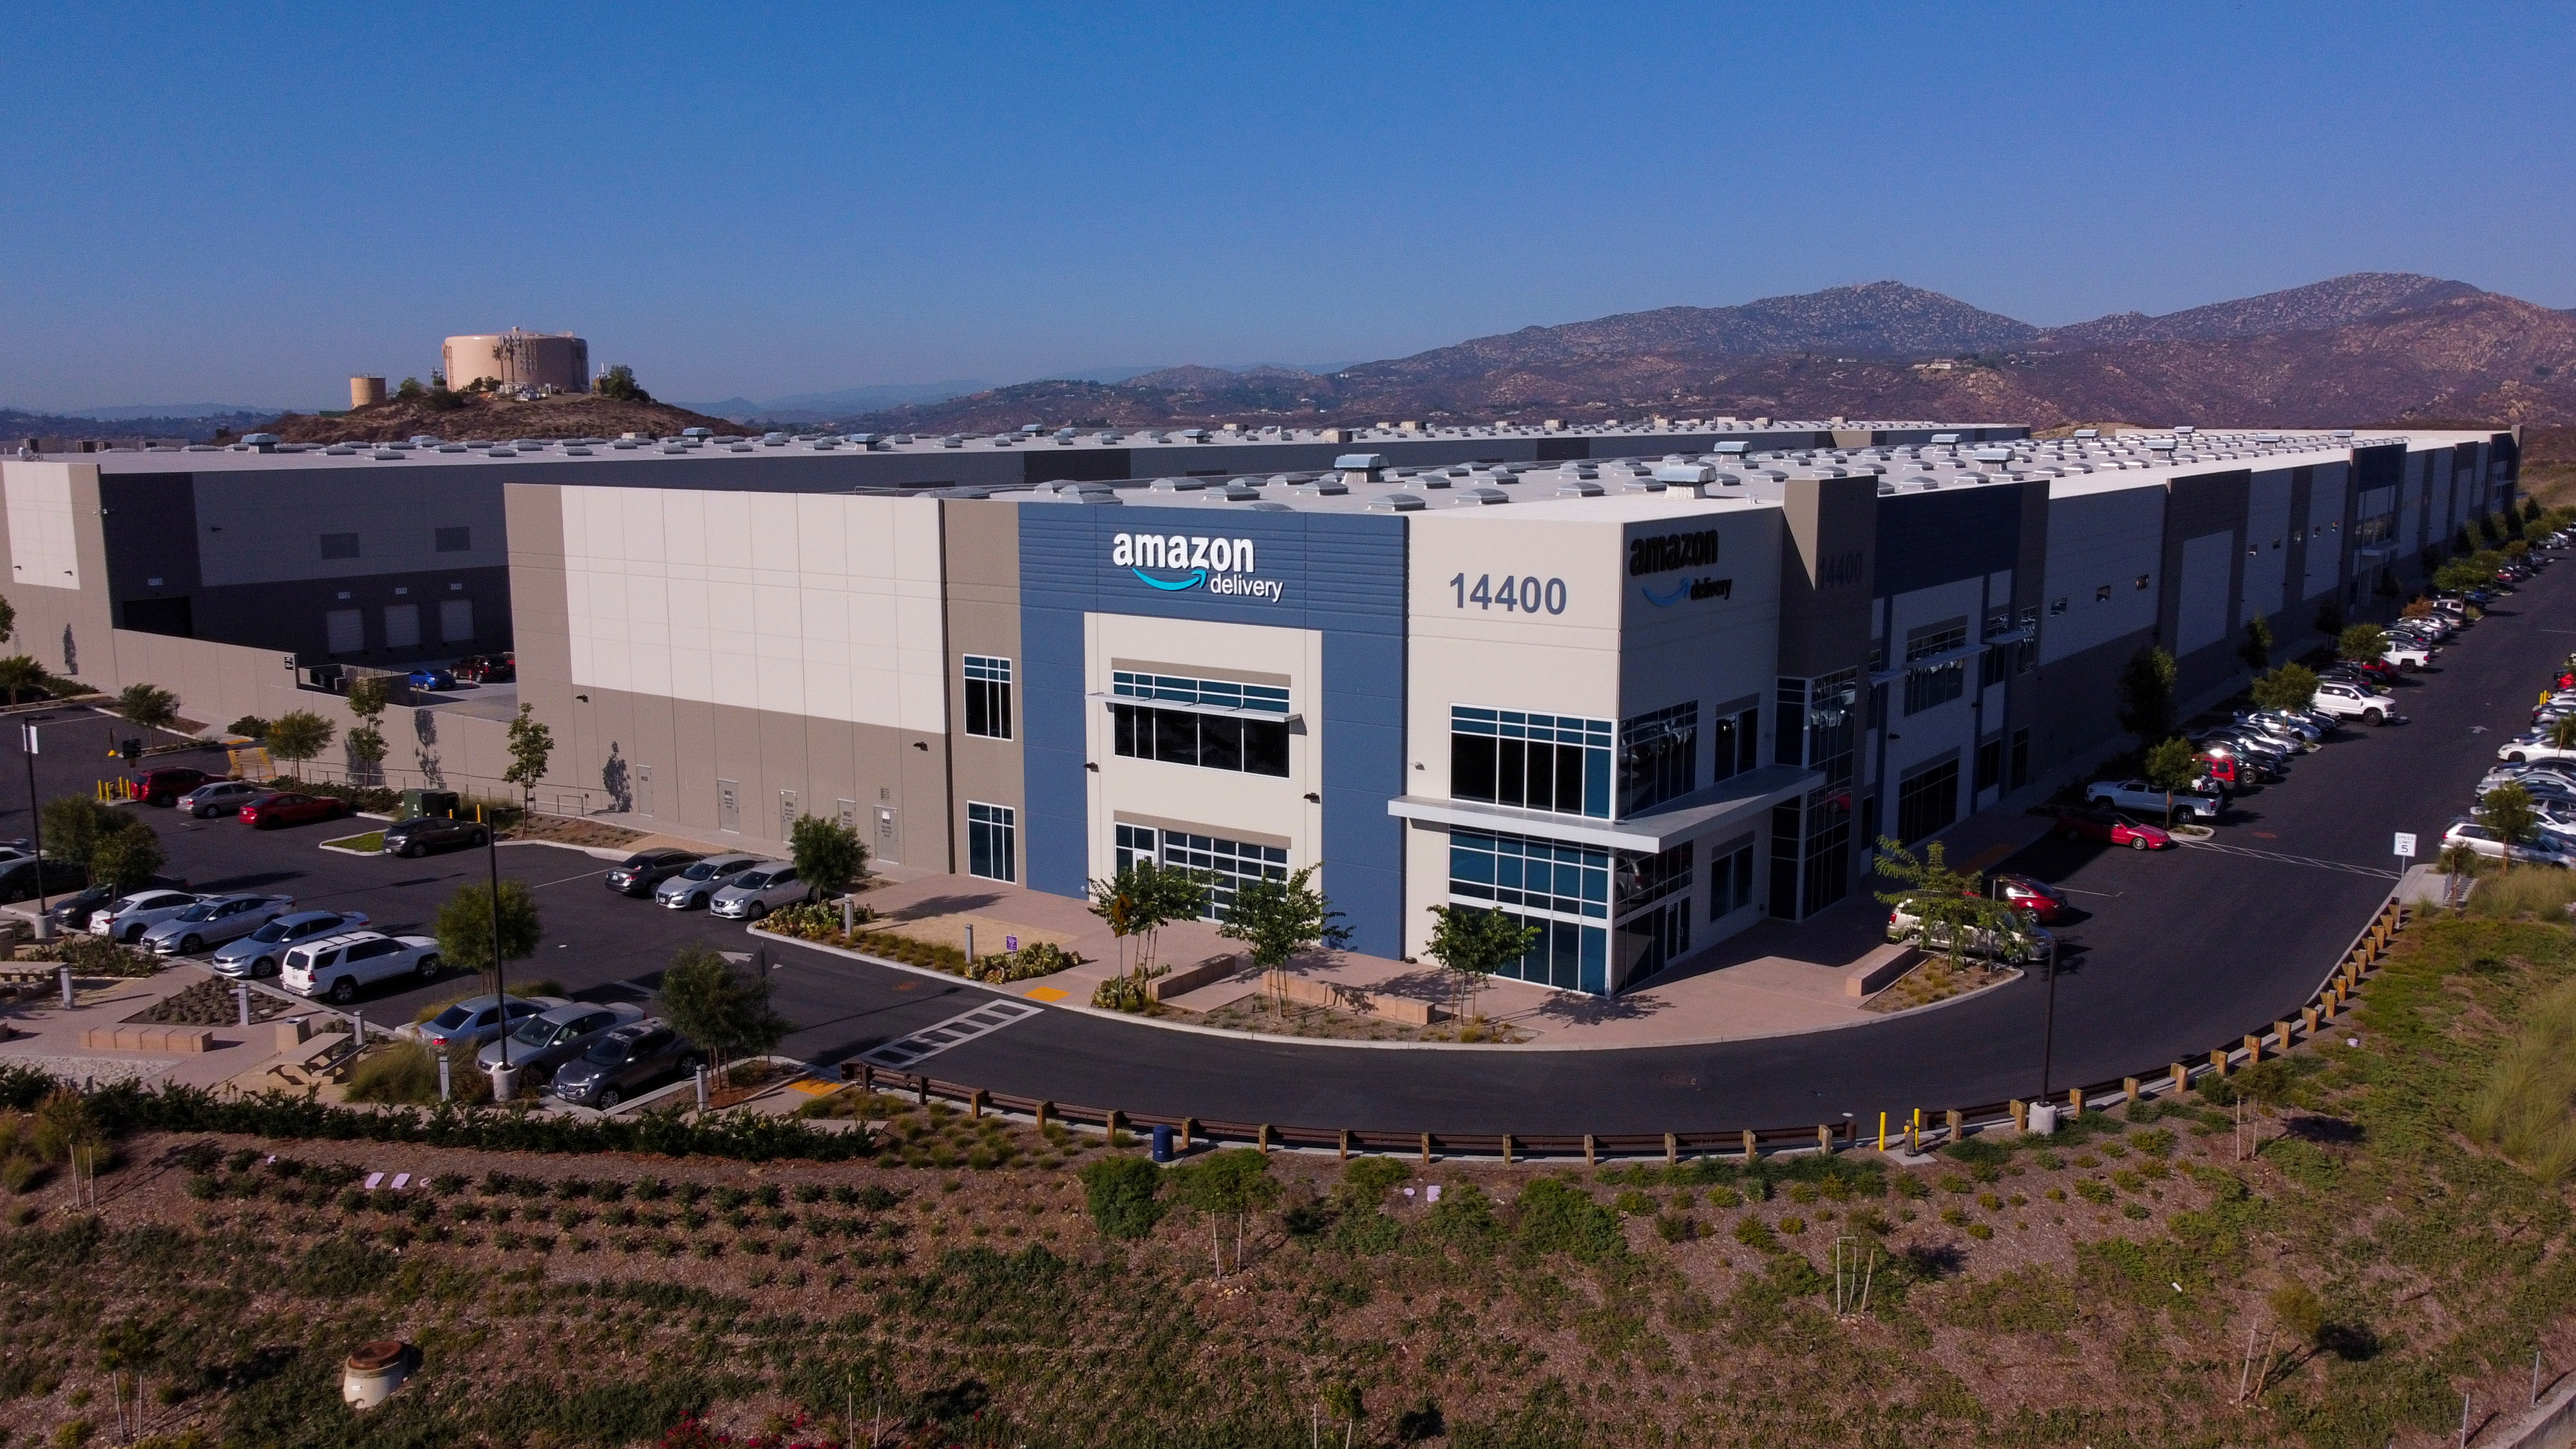 Amazon's warehouse facility DSD8 is seen in Poway, California, U.S., September 30, 2021. Picture taken September 30, 2021. Picture taken with a drone. REUTERS/Mike Blake/File Photo